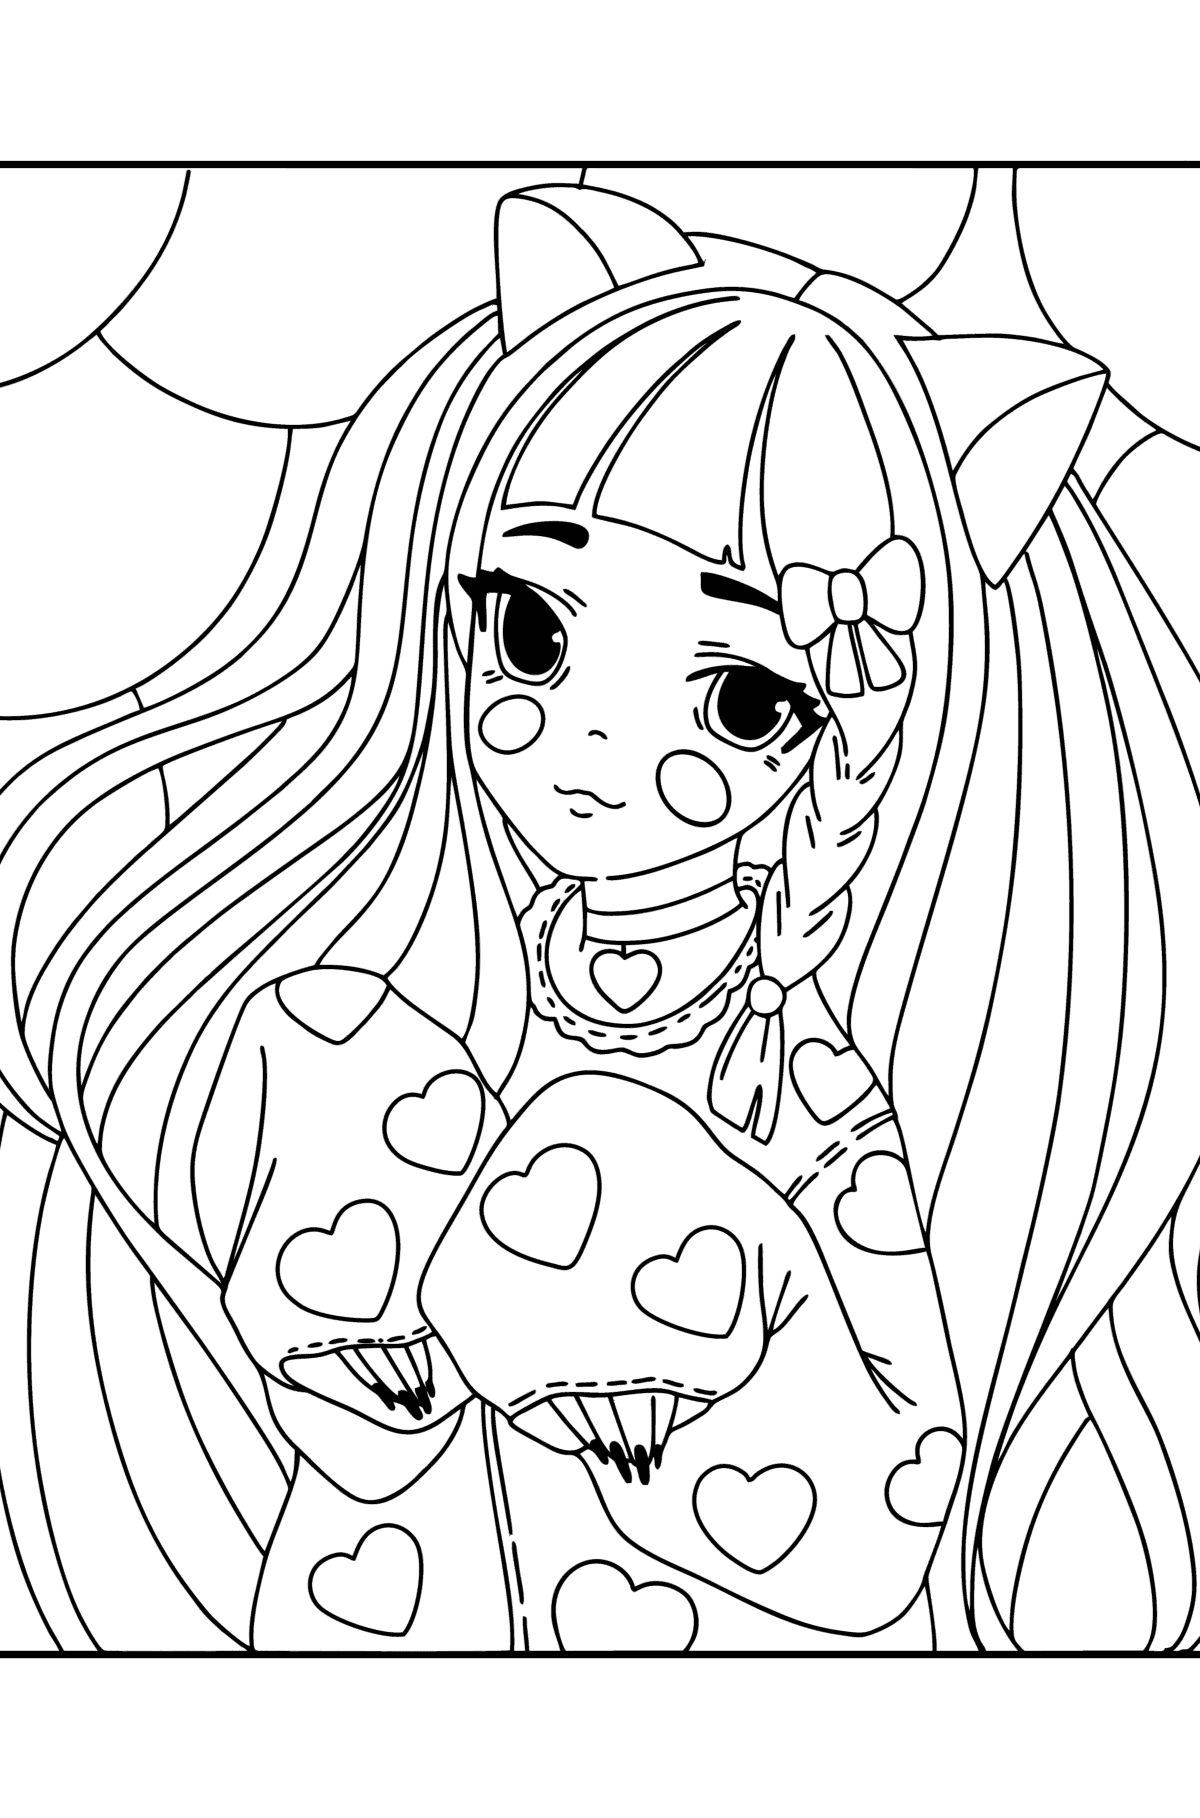 Girl Cartoon Doodle Kawaii Anime Coloring Page Cute Chibi Manga Comic  Drawing PNG Images | EPS Free Download - Pikbest